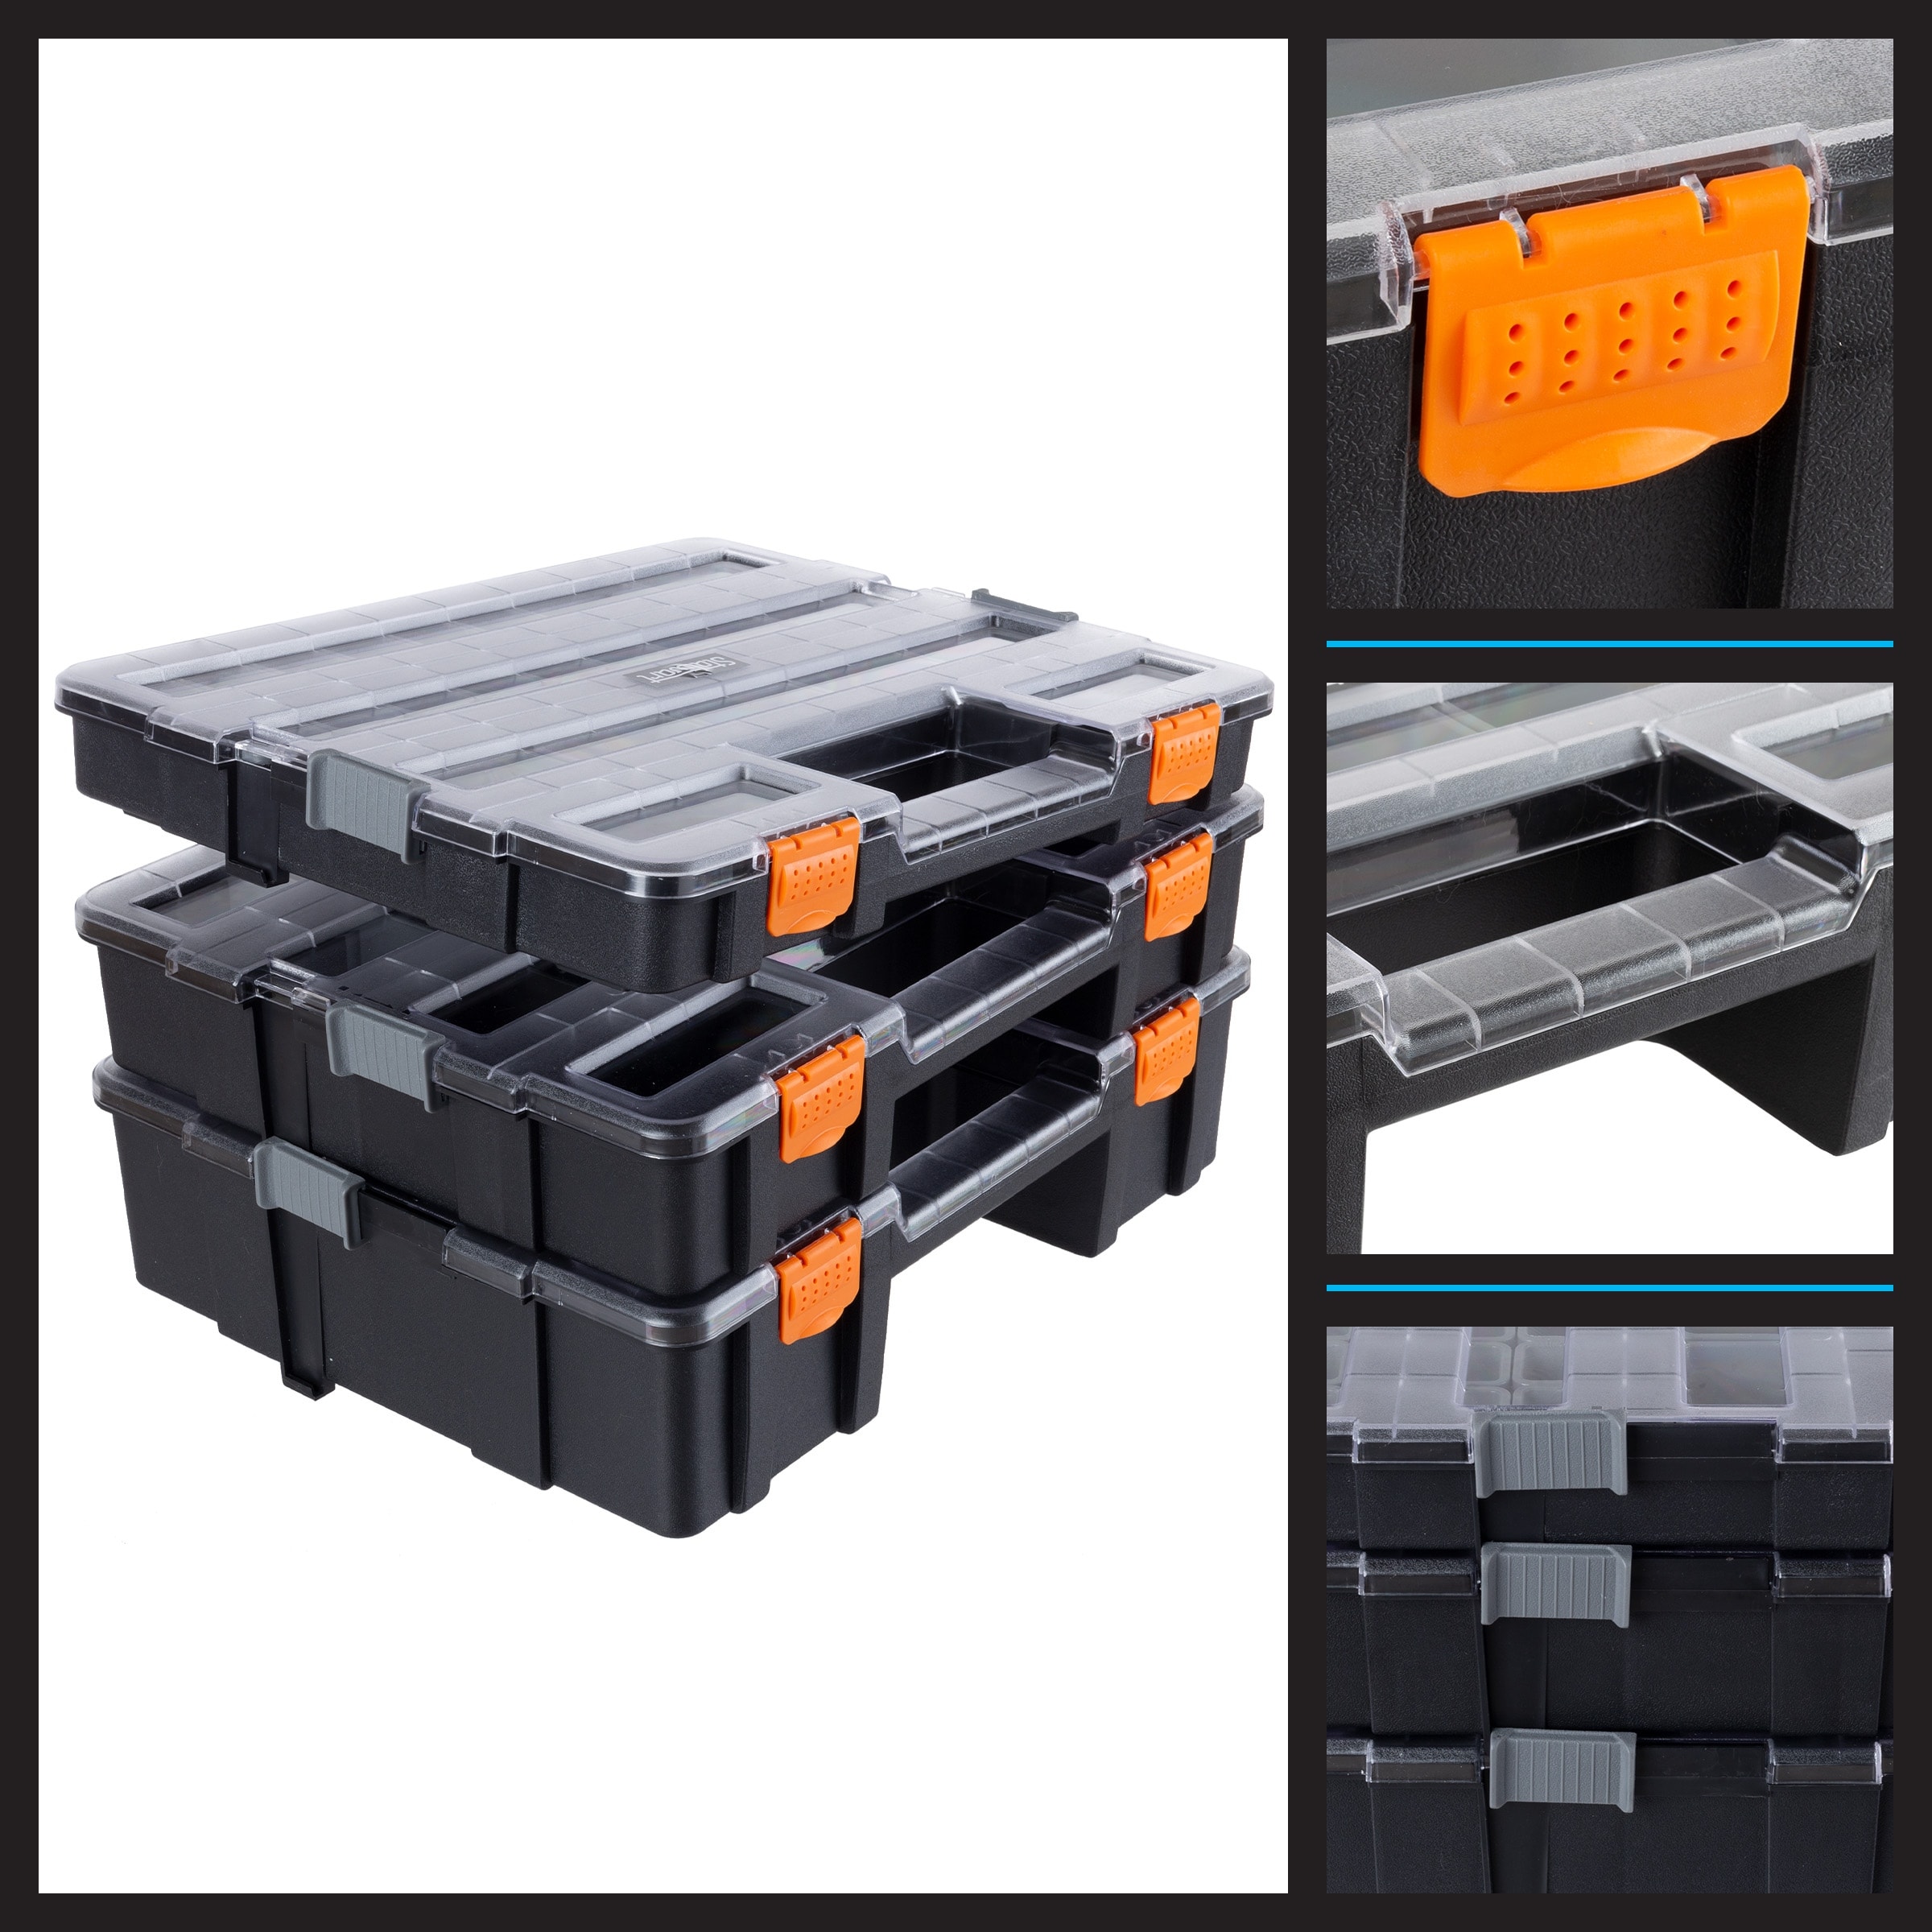 https://ak1.ostkcdn.com/images/products/is/images/direct/af3ddfbc8c90db6dd99eb841d41f27f574e206d9/Tool-Box-Organizer---3-in-1-Portable-Parts-Organizer-with-52-Customizable-Compartments-by-Stalwart-%28Gray%29.jpg